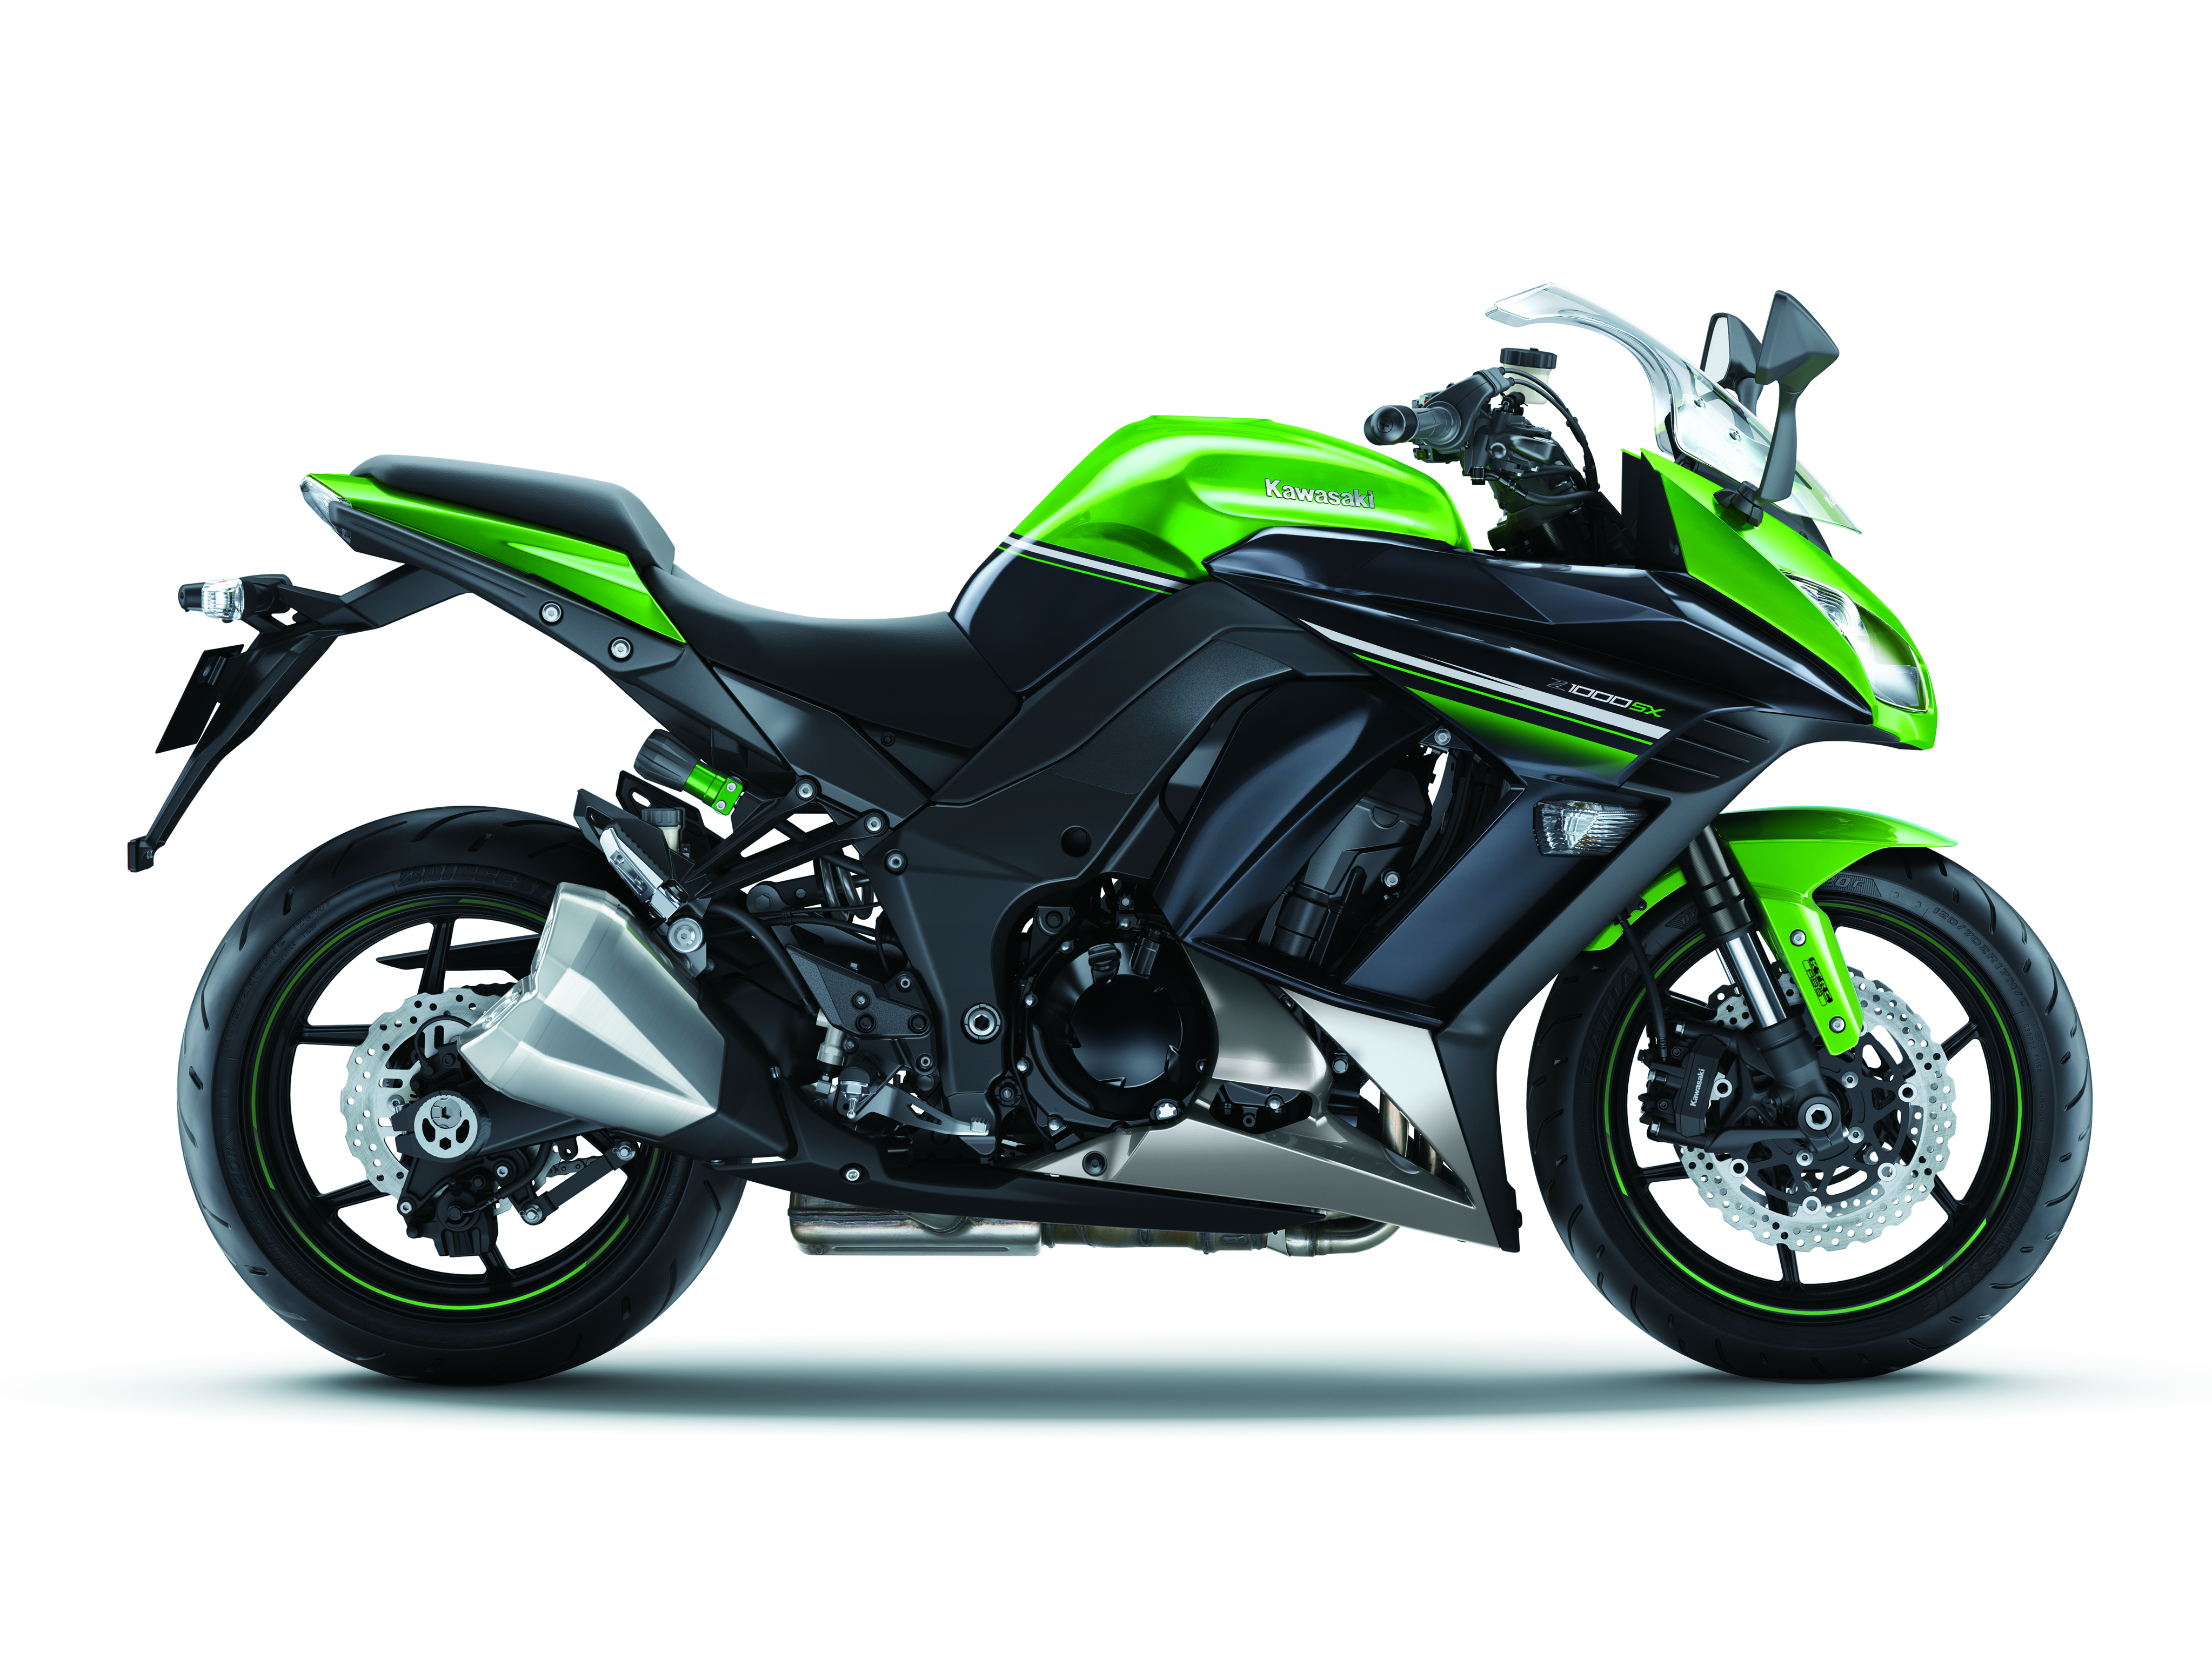 Kawasaki Z1000SX gets slipper clutch and standard ABS for 2016